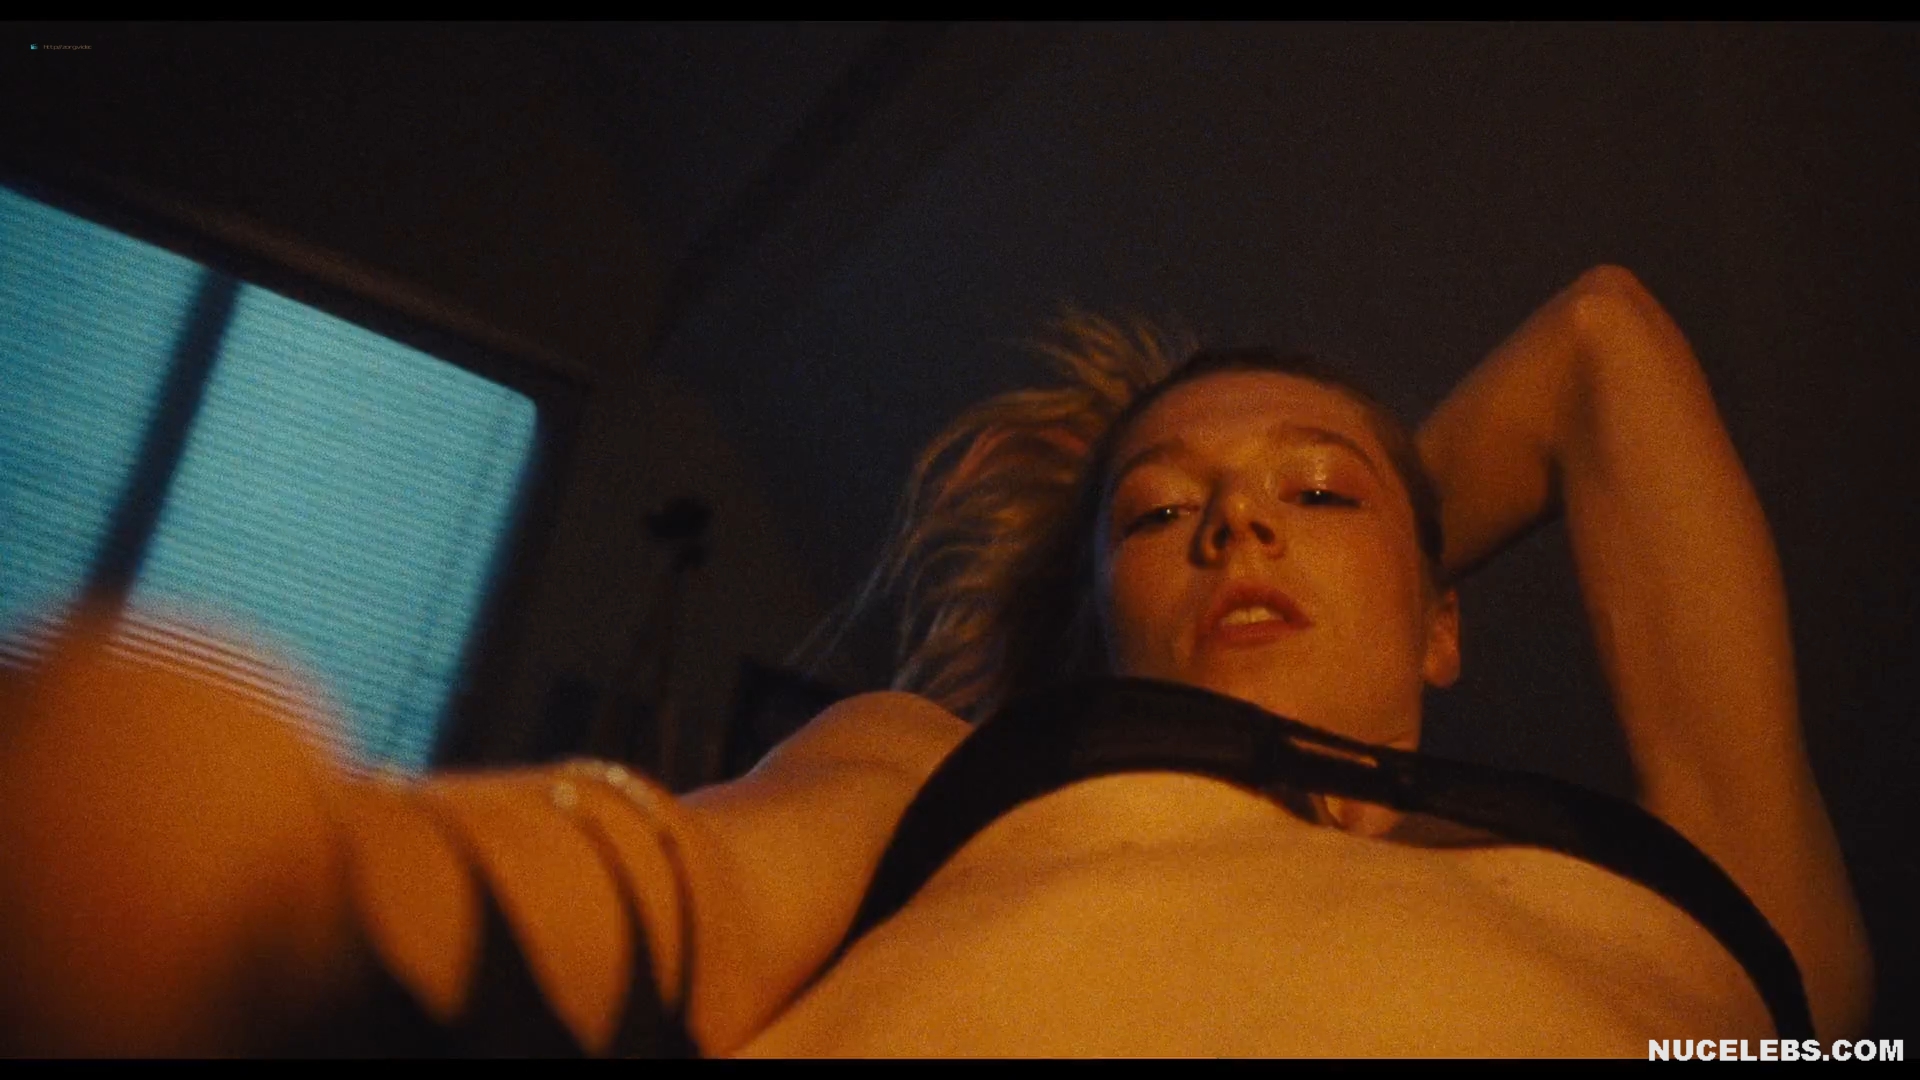 Hunter Schafer has starred in a variety of hot sex scenes on the Euphoria s...